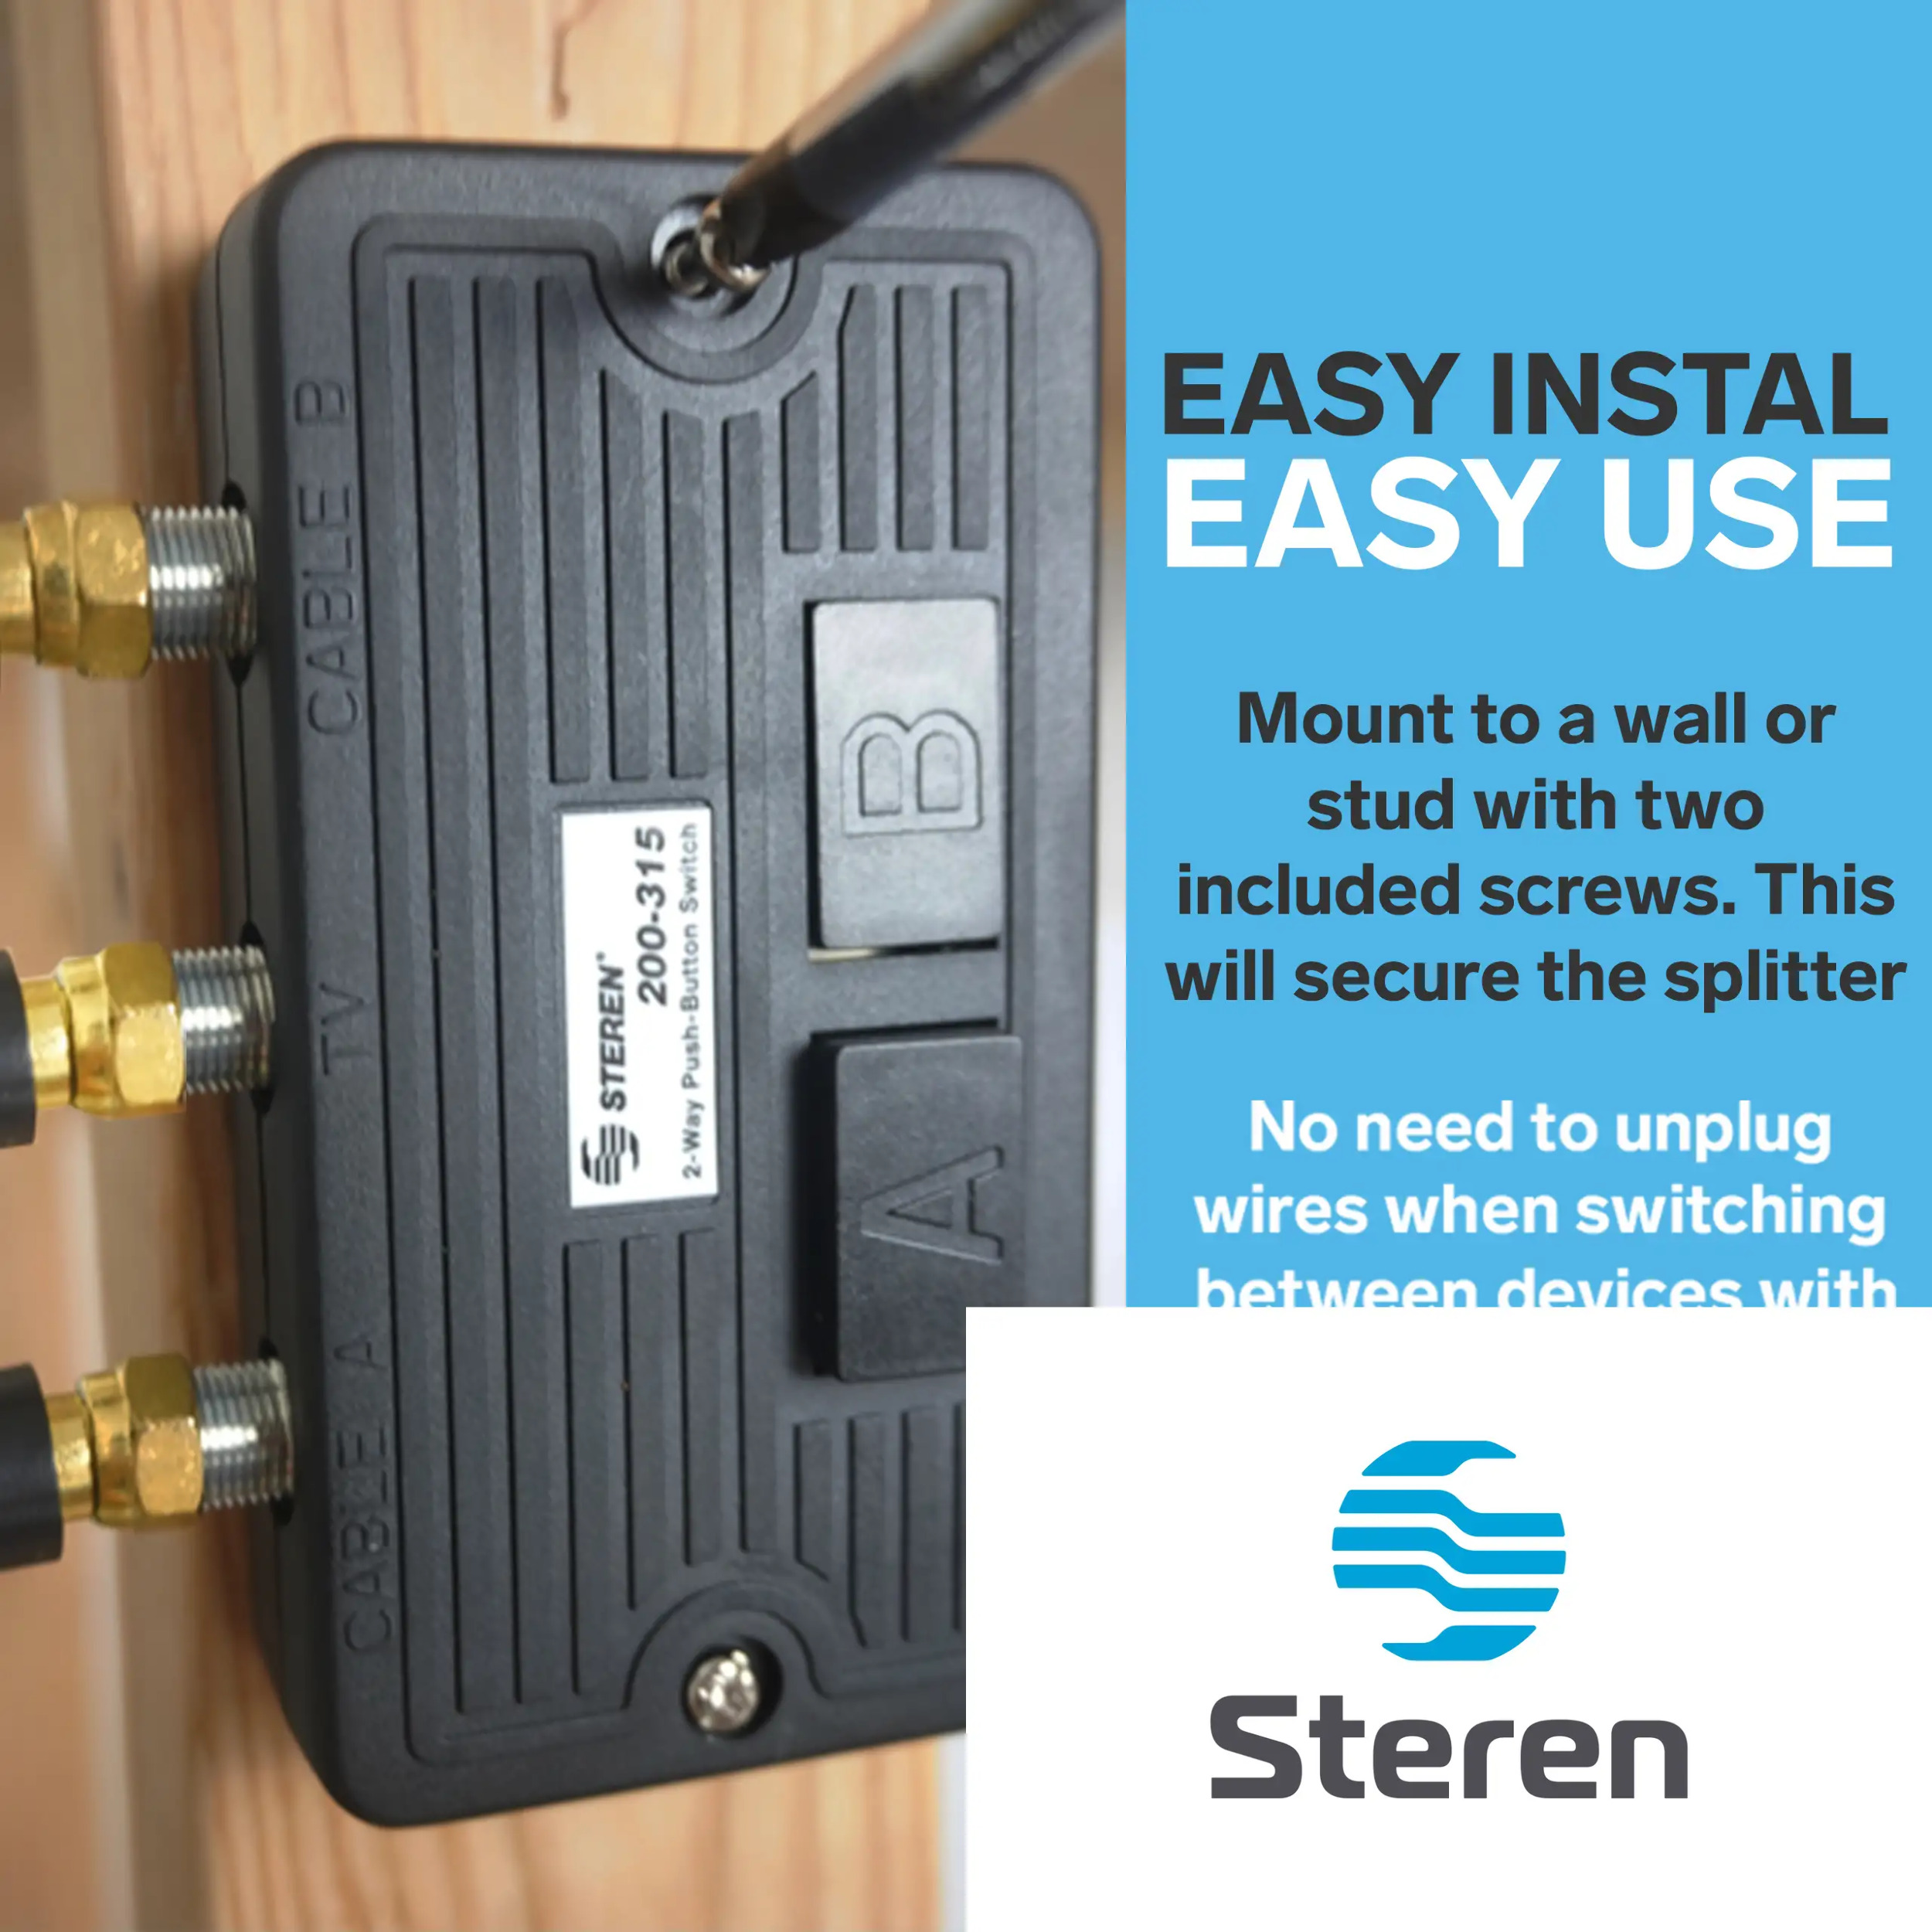 Steren 2-Way Coaxial A/B Push-Button Switch for TV, Antenna Splitter - 200-315 - image 3 of 4